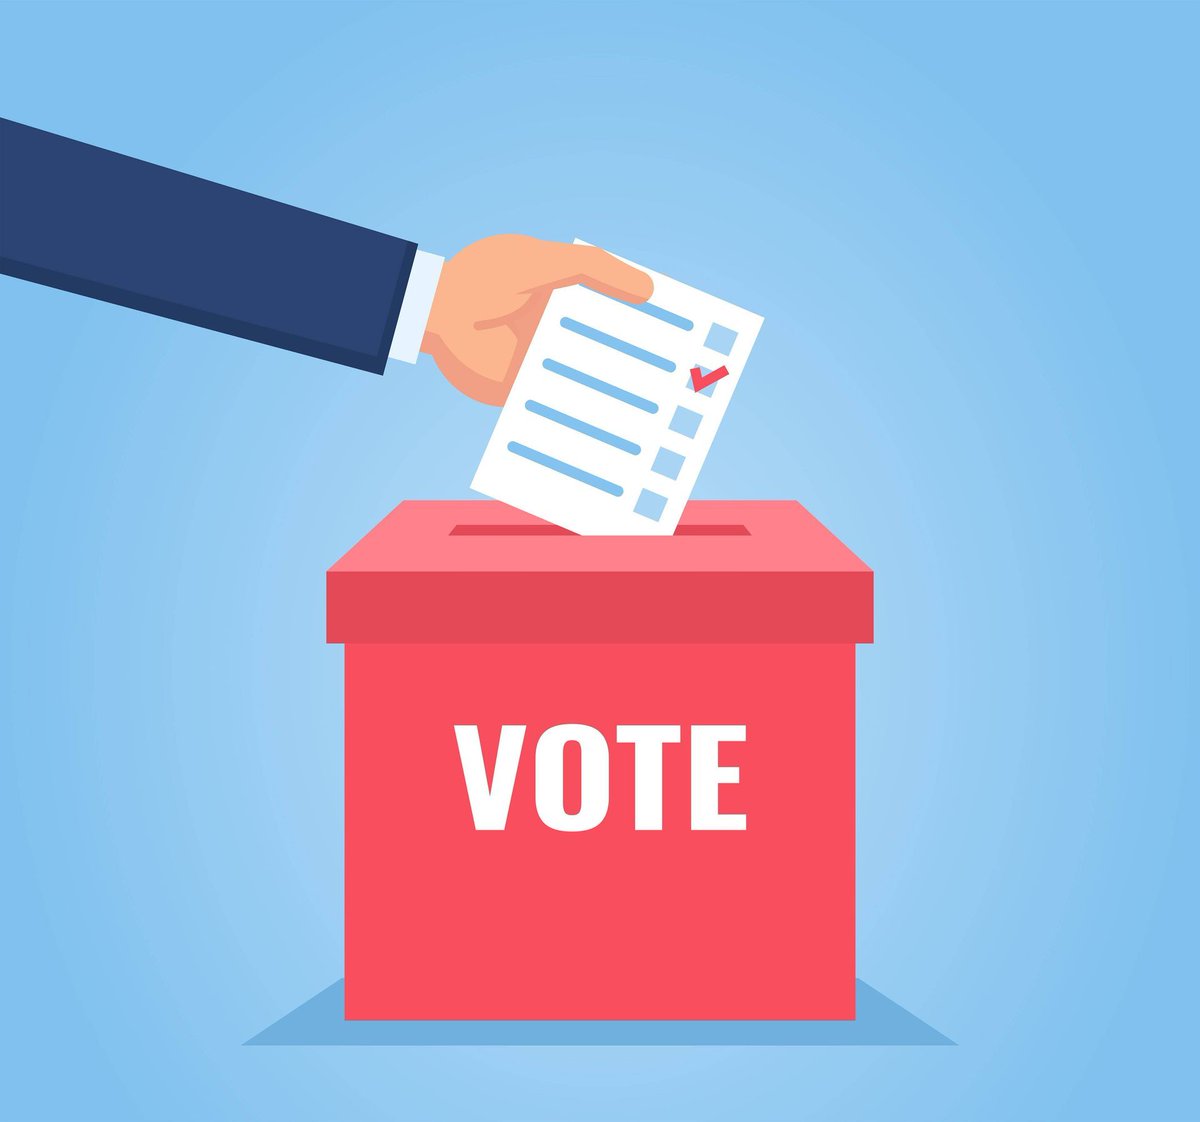 📣TODAY is the LAST day to cast your ballot!📣 

Eligible voters can vote by internet, phone or by paper until 8 p.m.

✨ For more information please visit our Election page at buff.ly/3UYxQbl. 

#Election #RamaraElection #2024ByElection #MunicipalElection #VoteNow #Vote